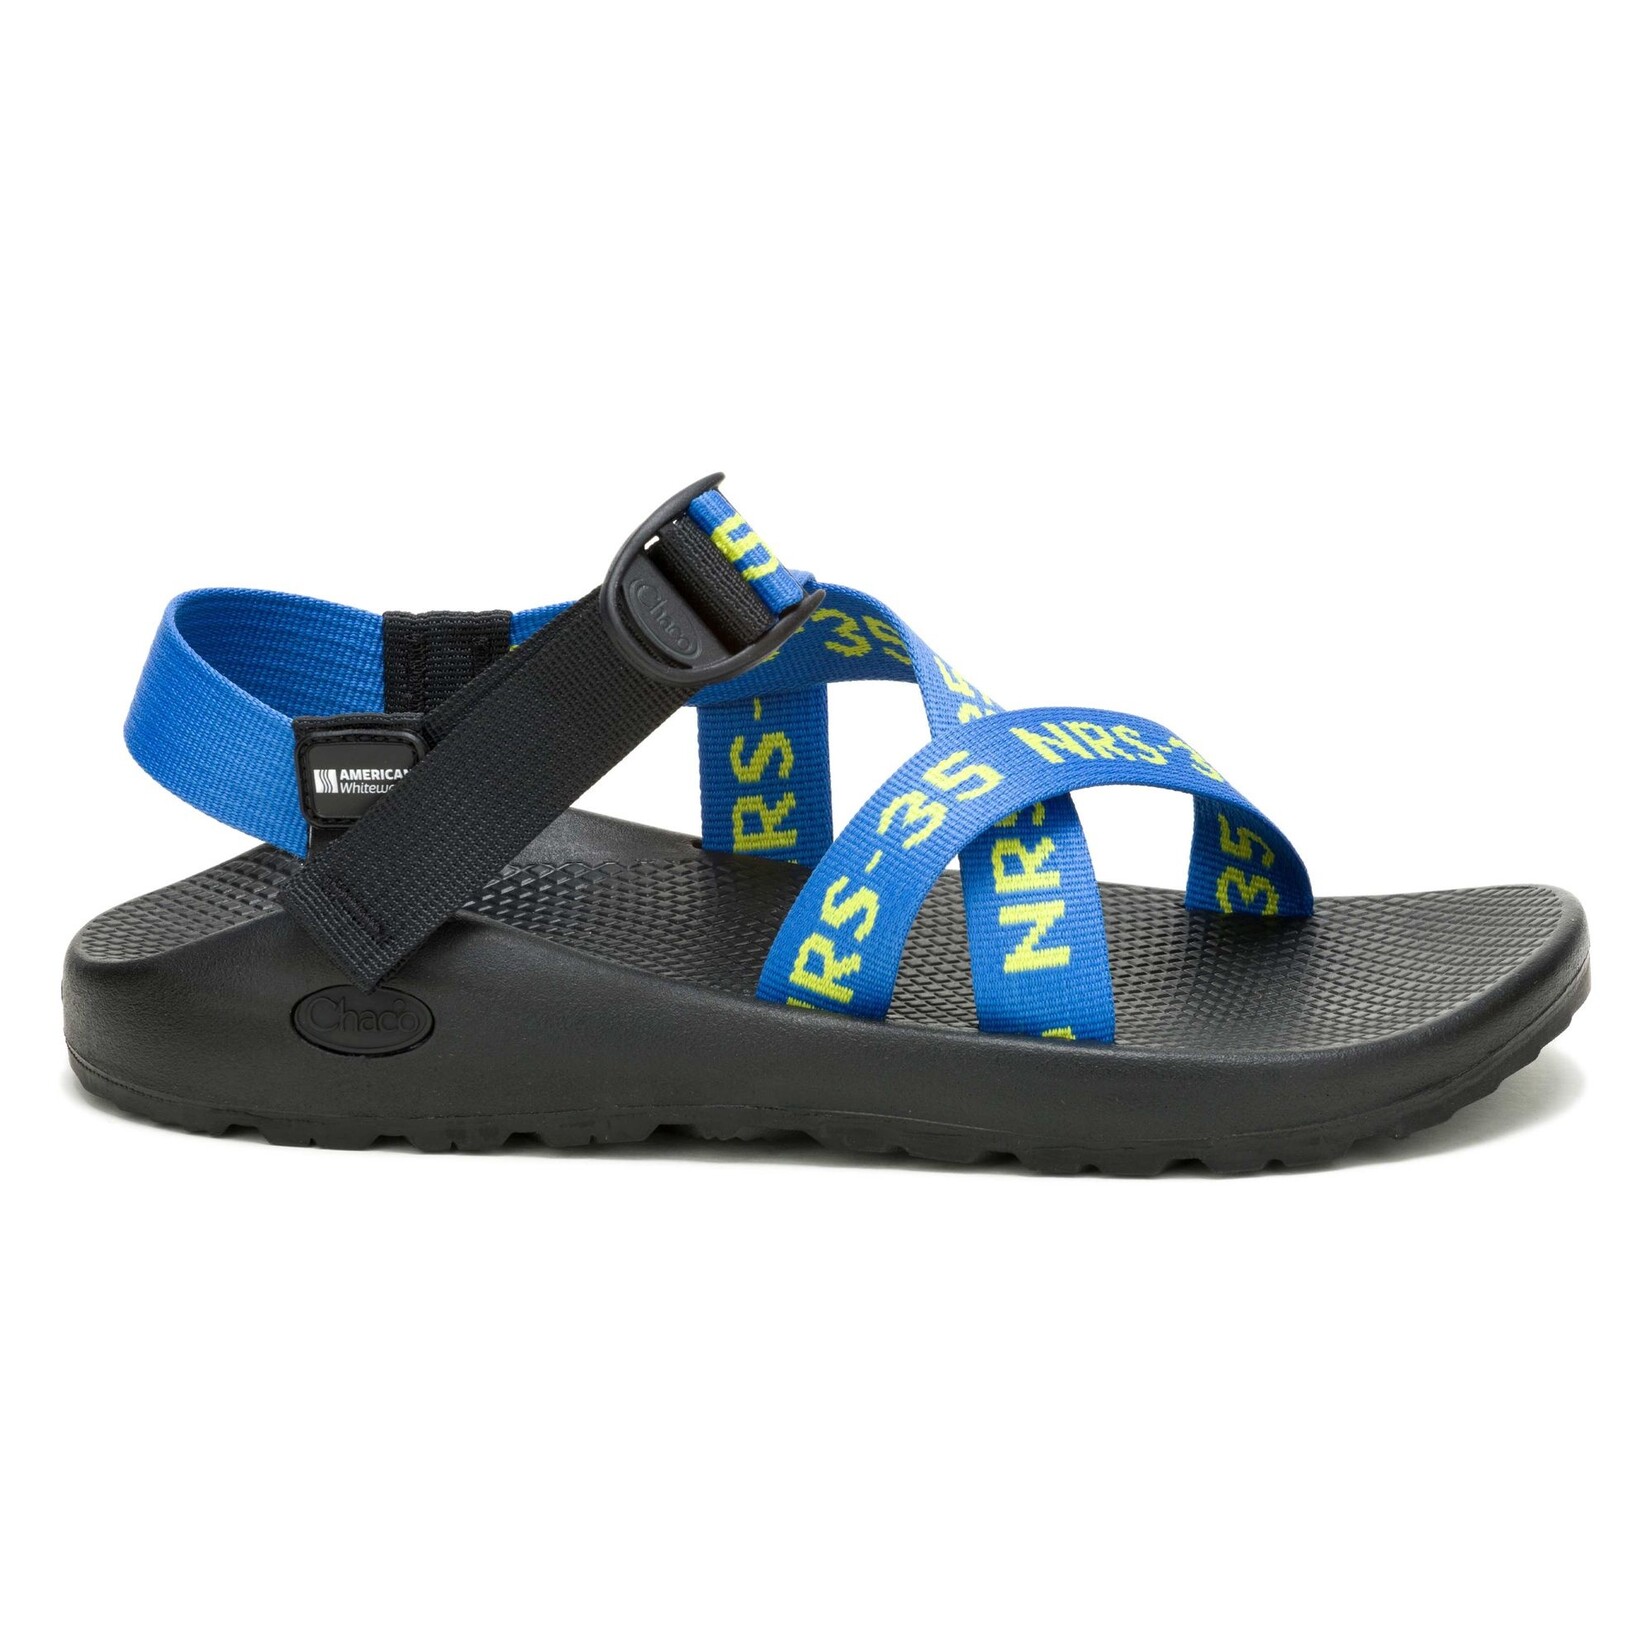 Chaco NRS + Chaco Men's Z/1 Classic Sandals